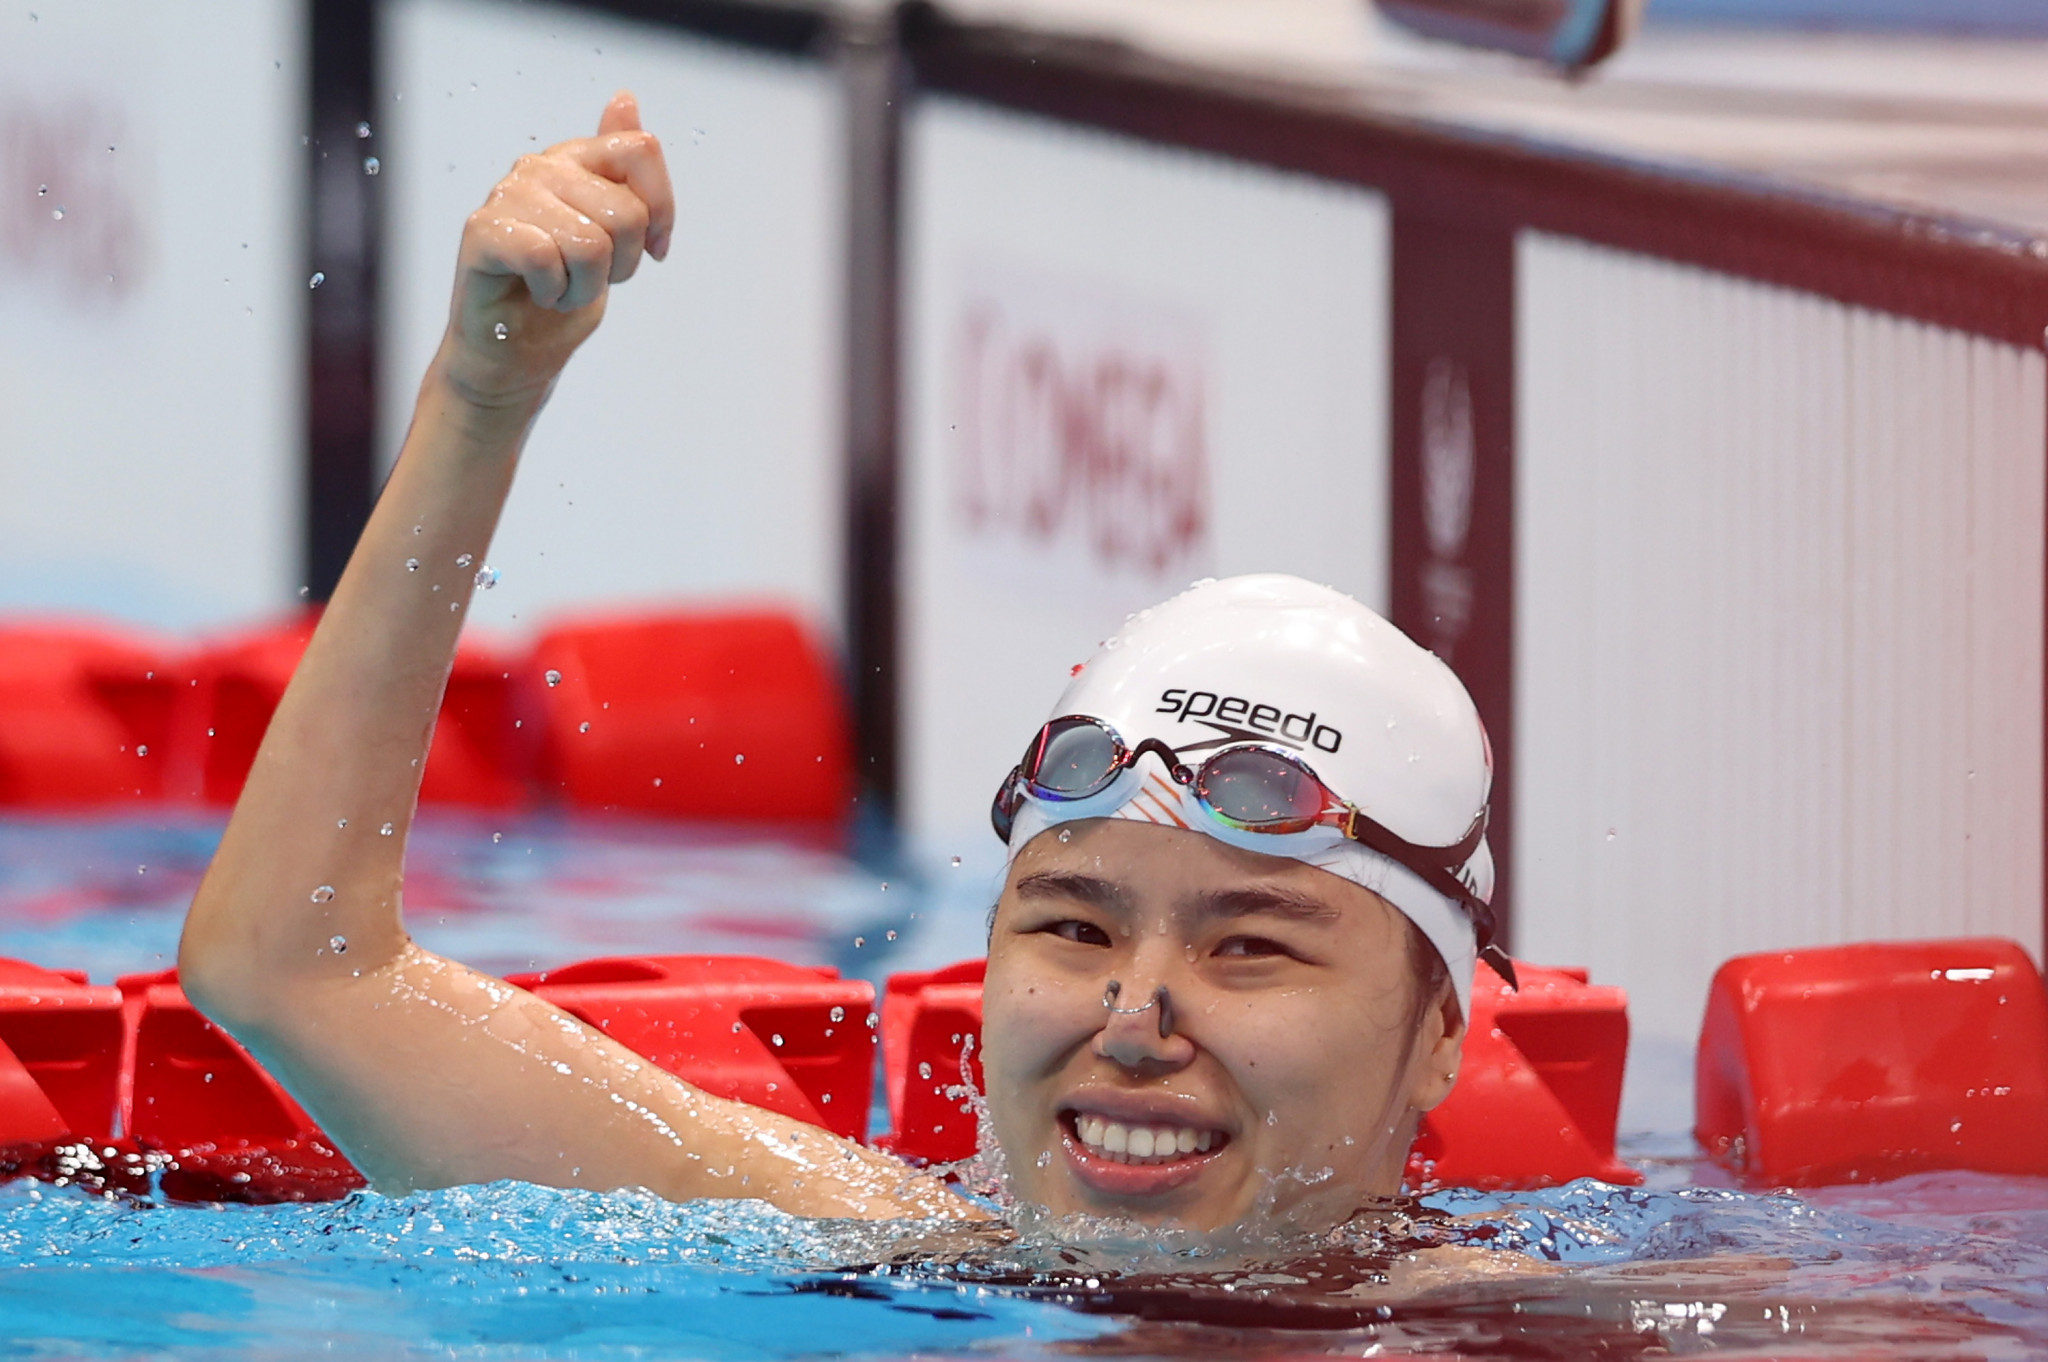 Yip Pin Xiu defended her two swimming titles from Rio 2016 ©Getty Images